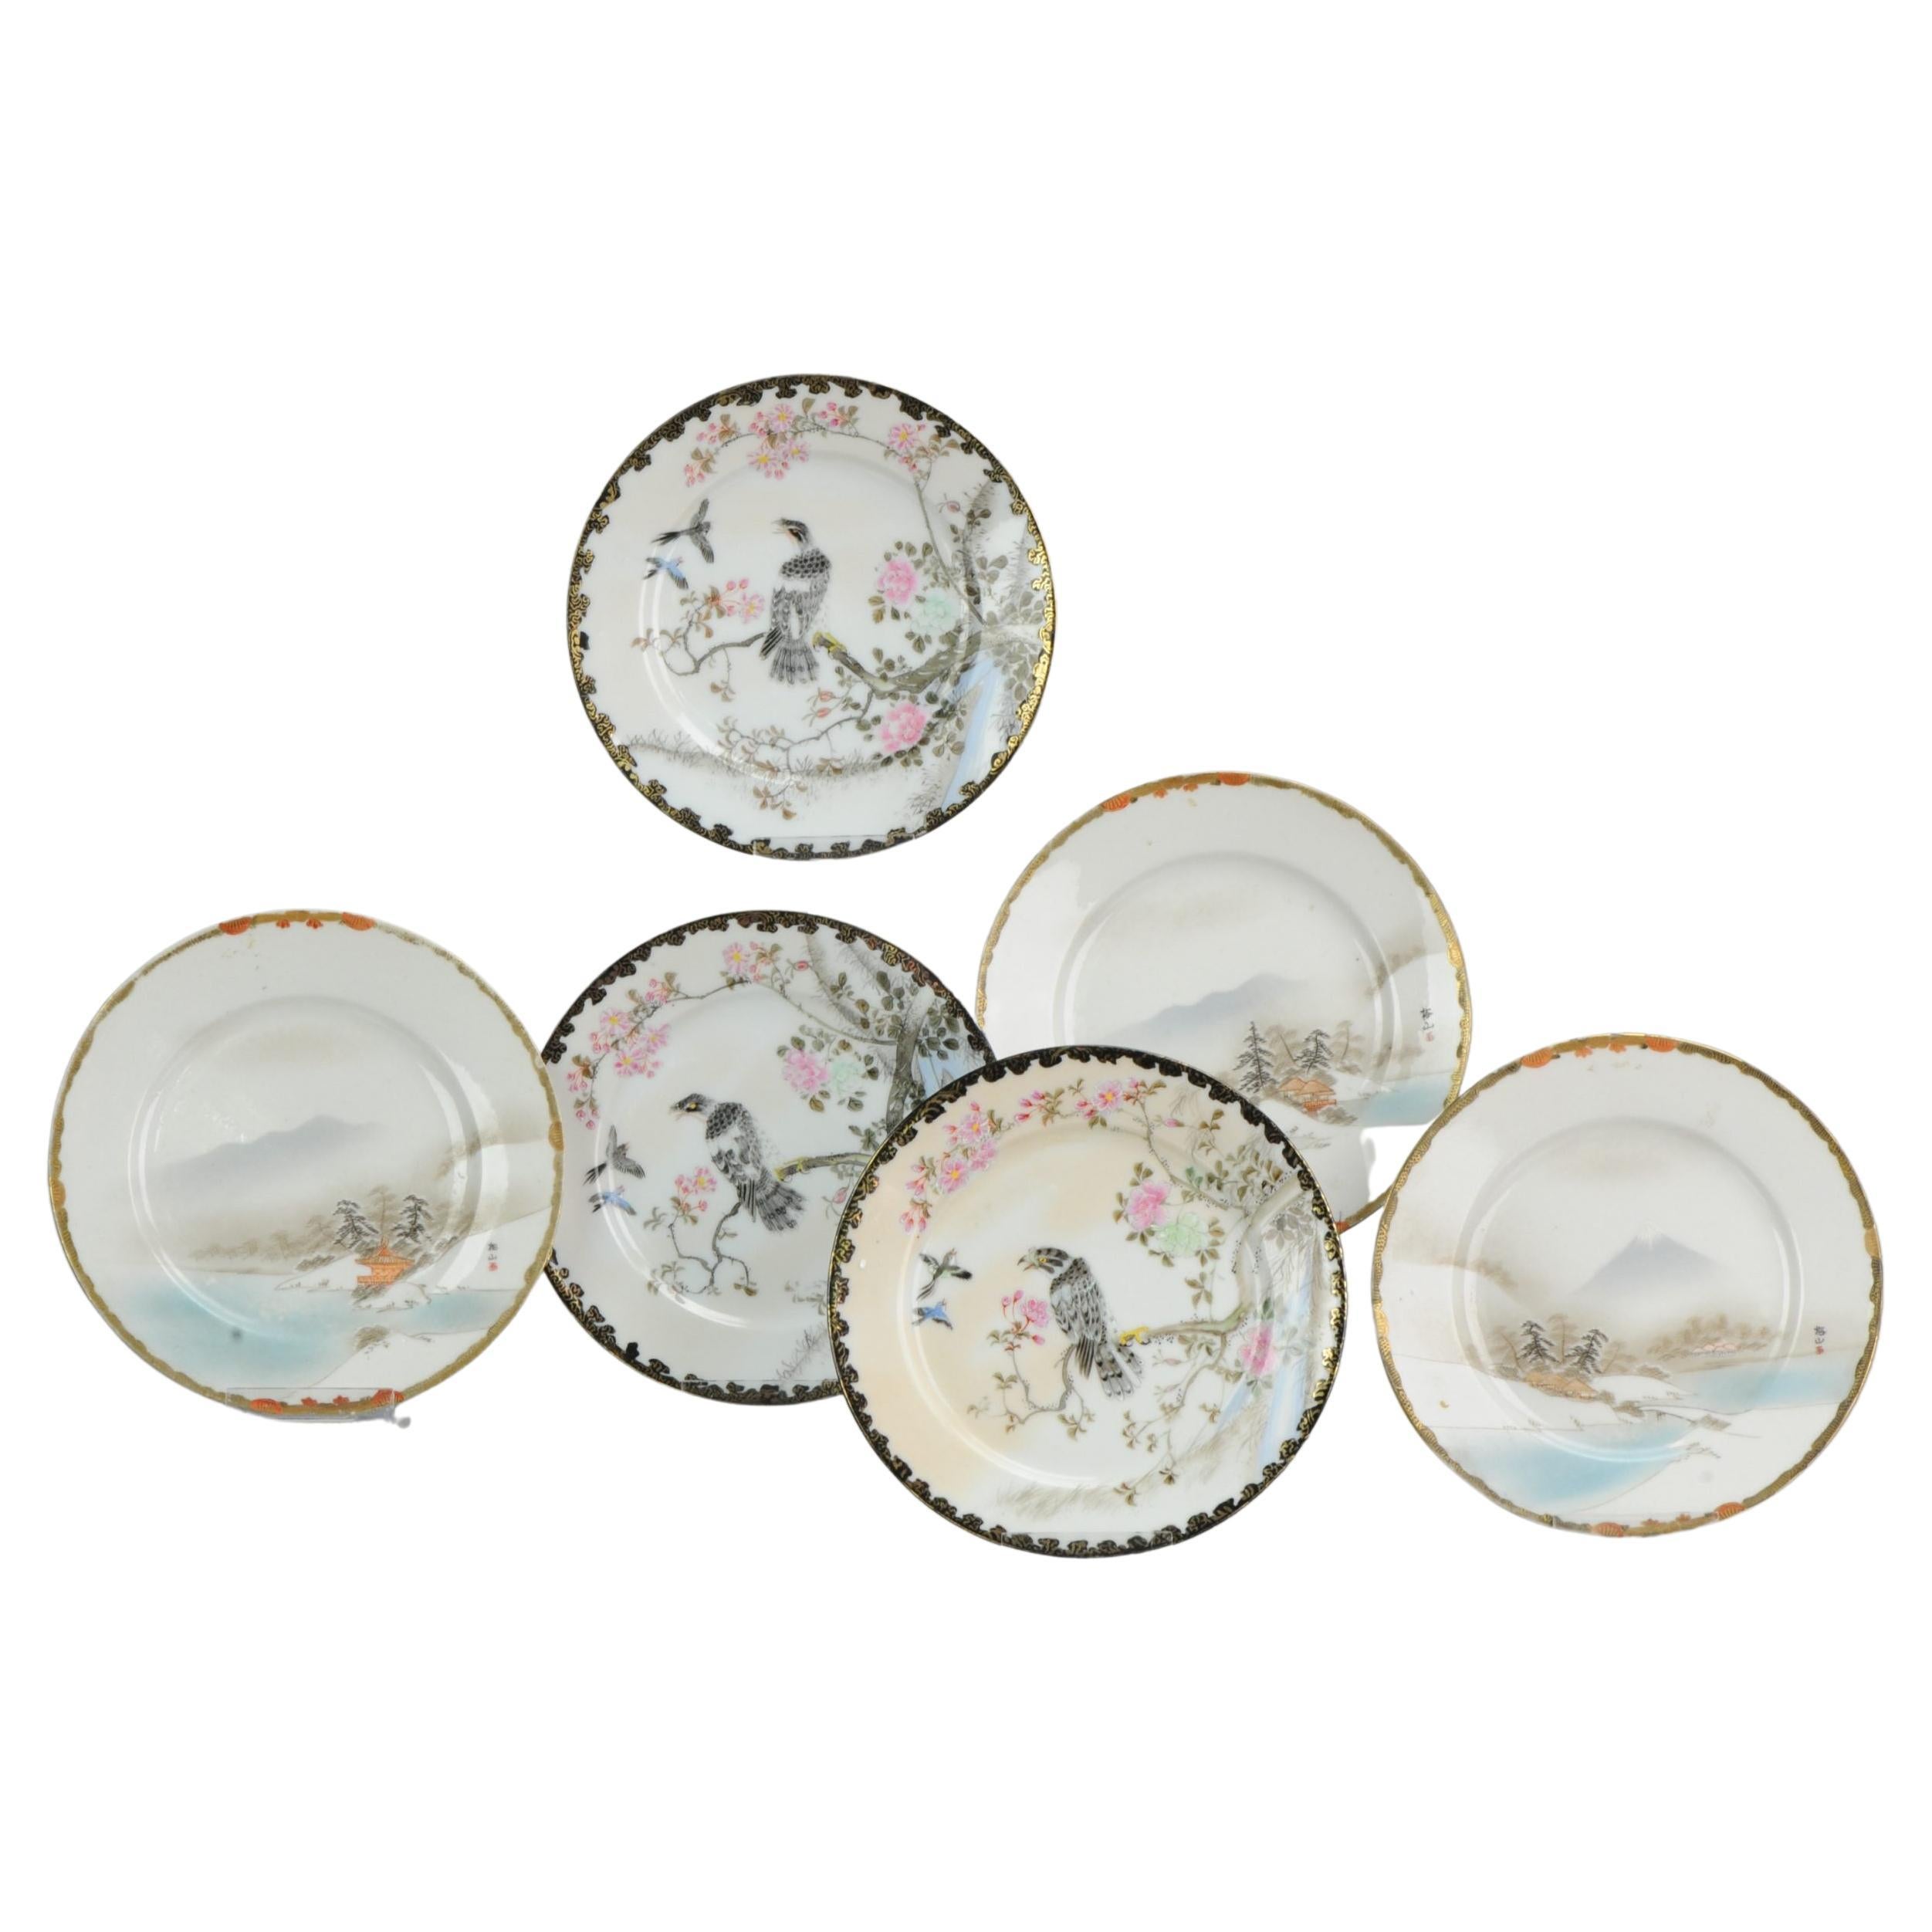 Set of 6 Pieces Japanese Porcelain Plates Hand Painted Taisho Period, 1920-1940 For Sale